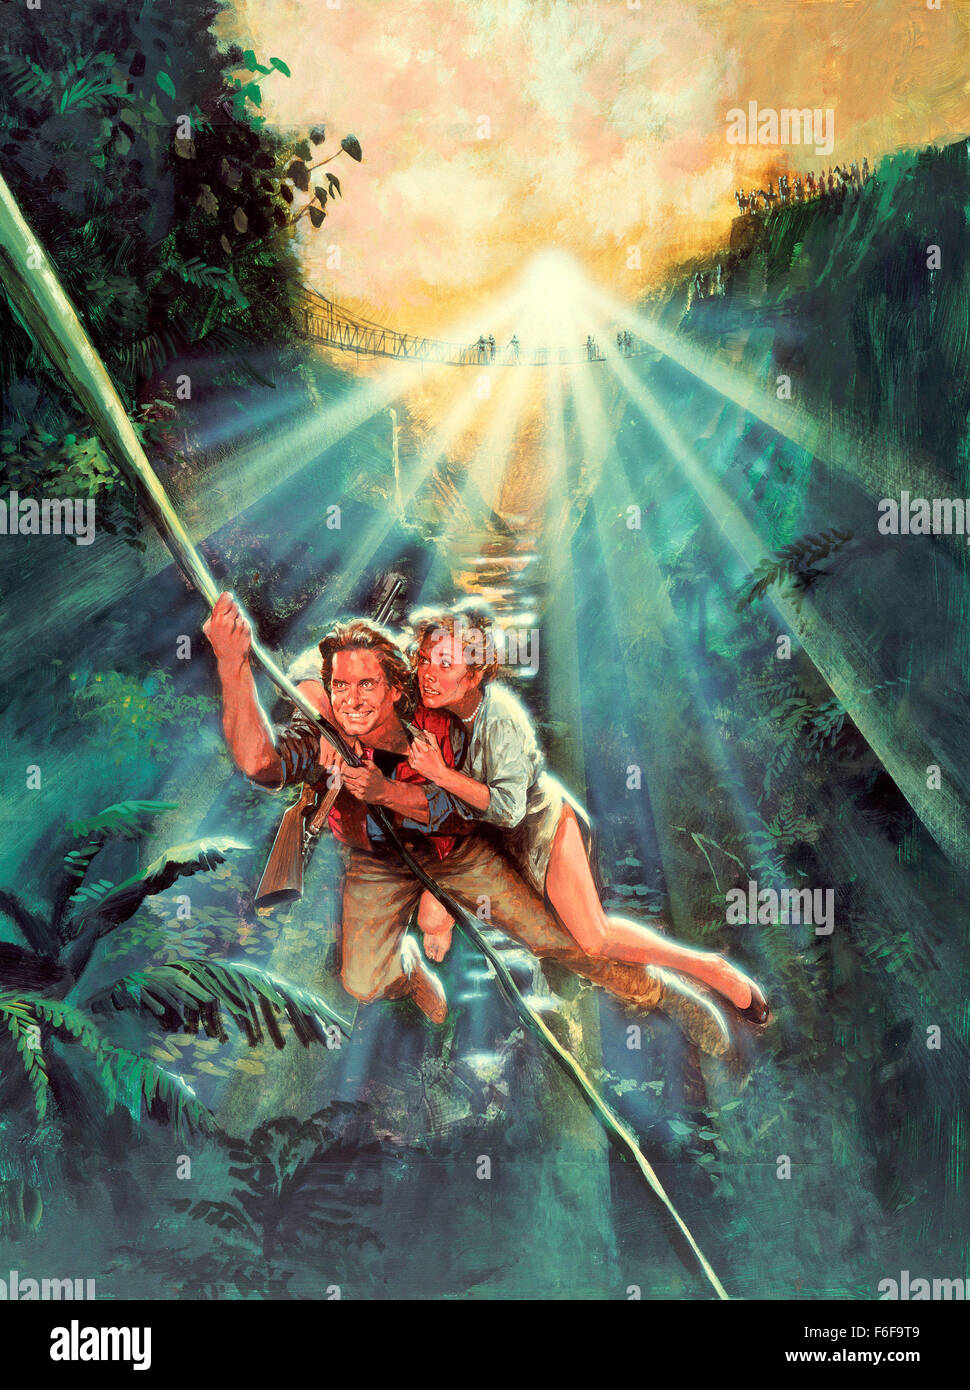 Mar 30, 1984; Los Angeles, CA, USA; Actor MICHAEL DOUGLAS stars as Jack T. Colton and KATHLEEN TURNER as Joan Wilder in the 20th Century Fox action comedy, 'Romancing the Stone.' Directed by Robert Zemeckis. Stock Photo